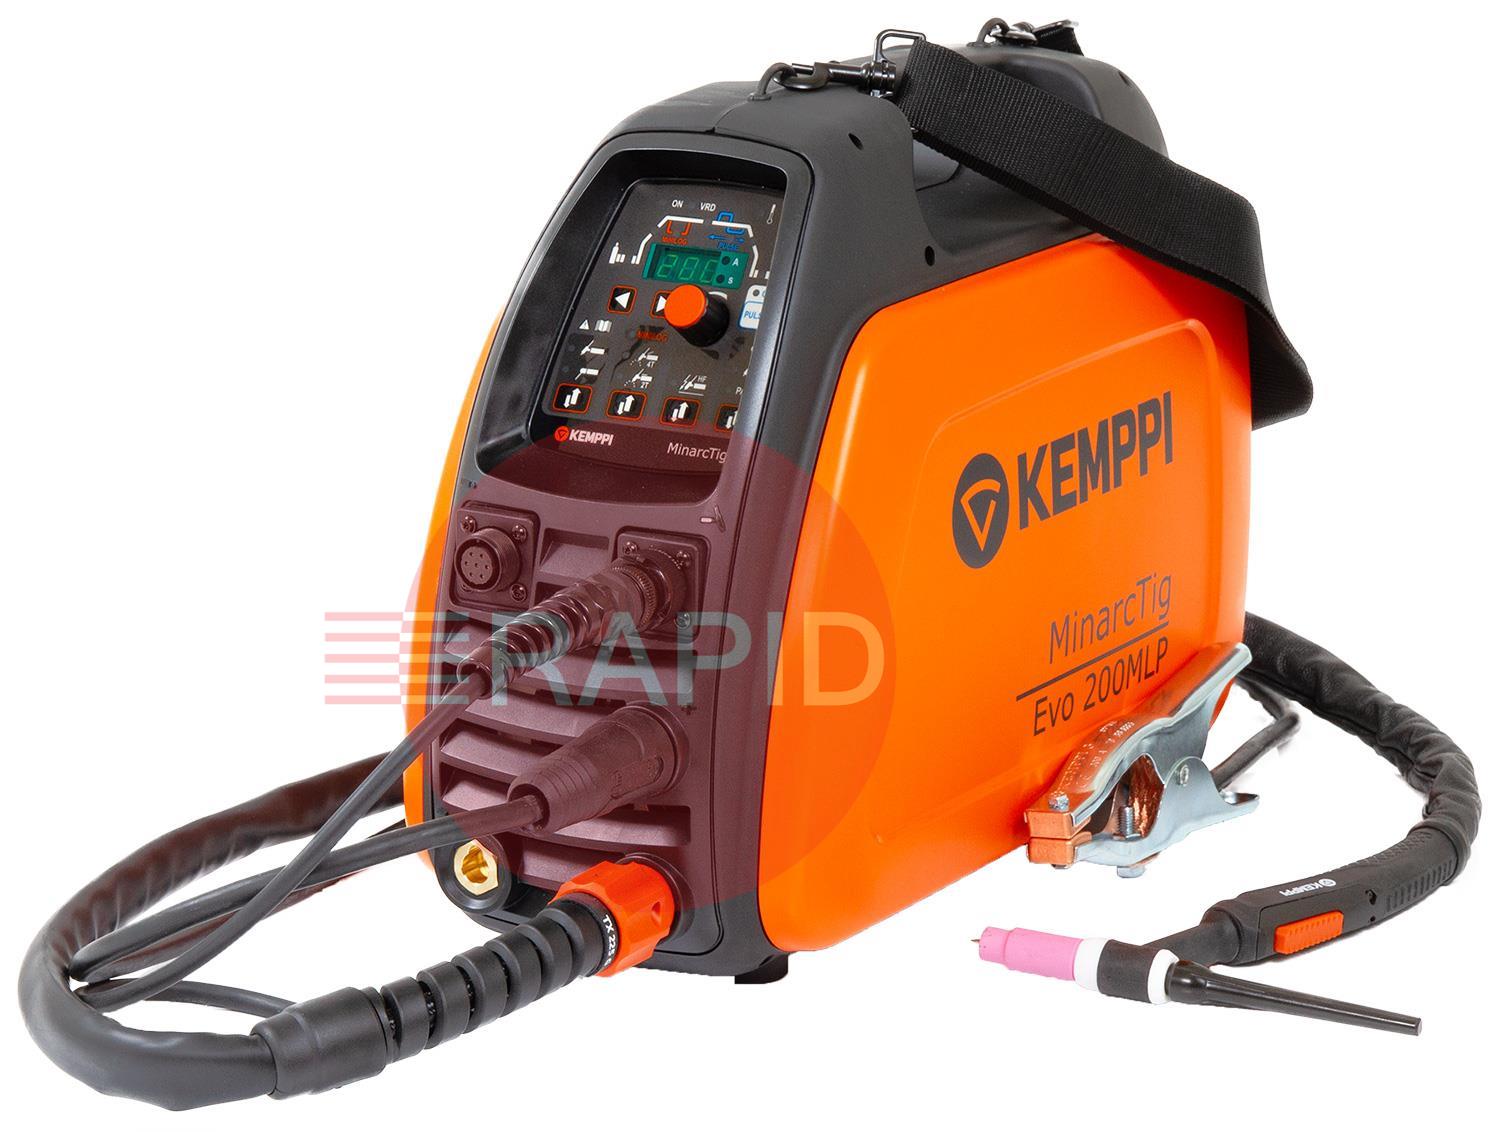 Minarctig200EvoMLP  Kemppi MinarcTig Evo 200 MLP with Pulse Ready to Weld Package, includes TIG Torch & Earth Cable - 230v, CE